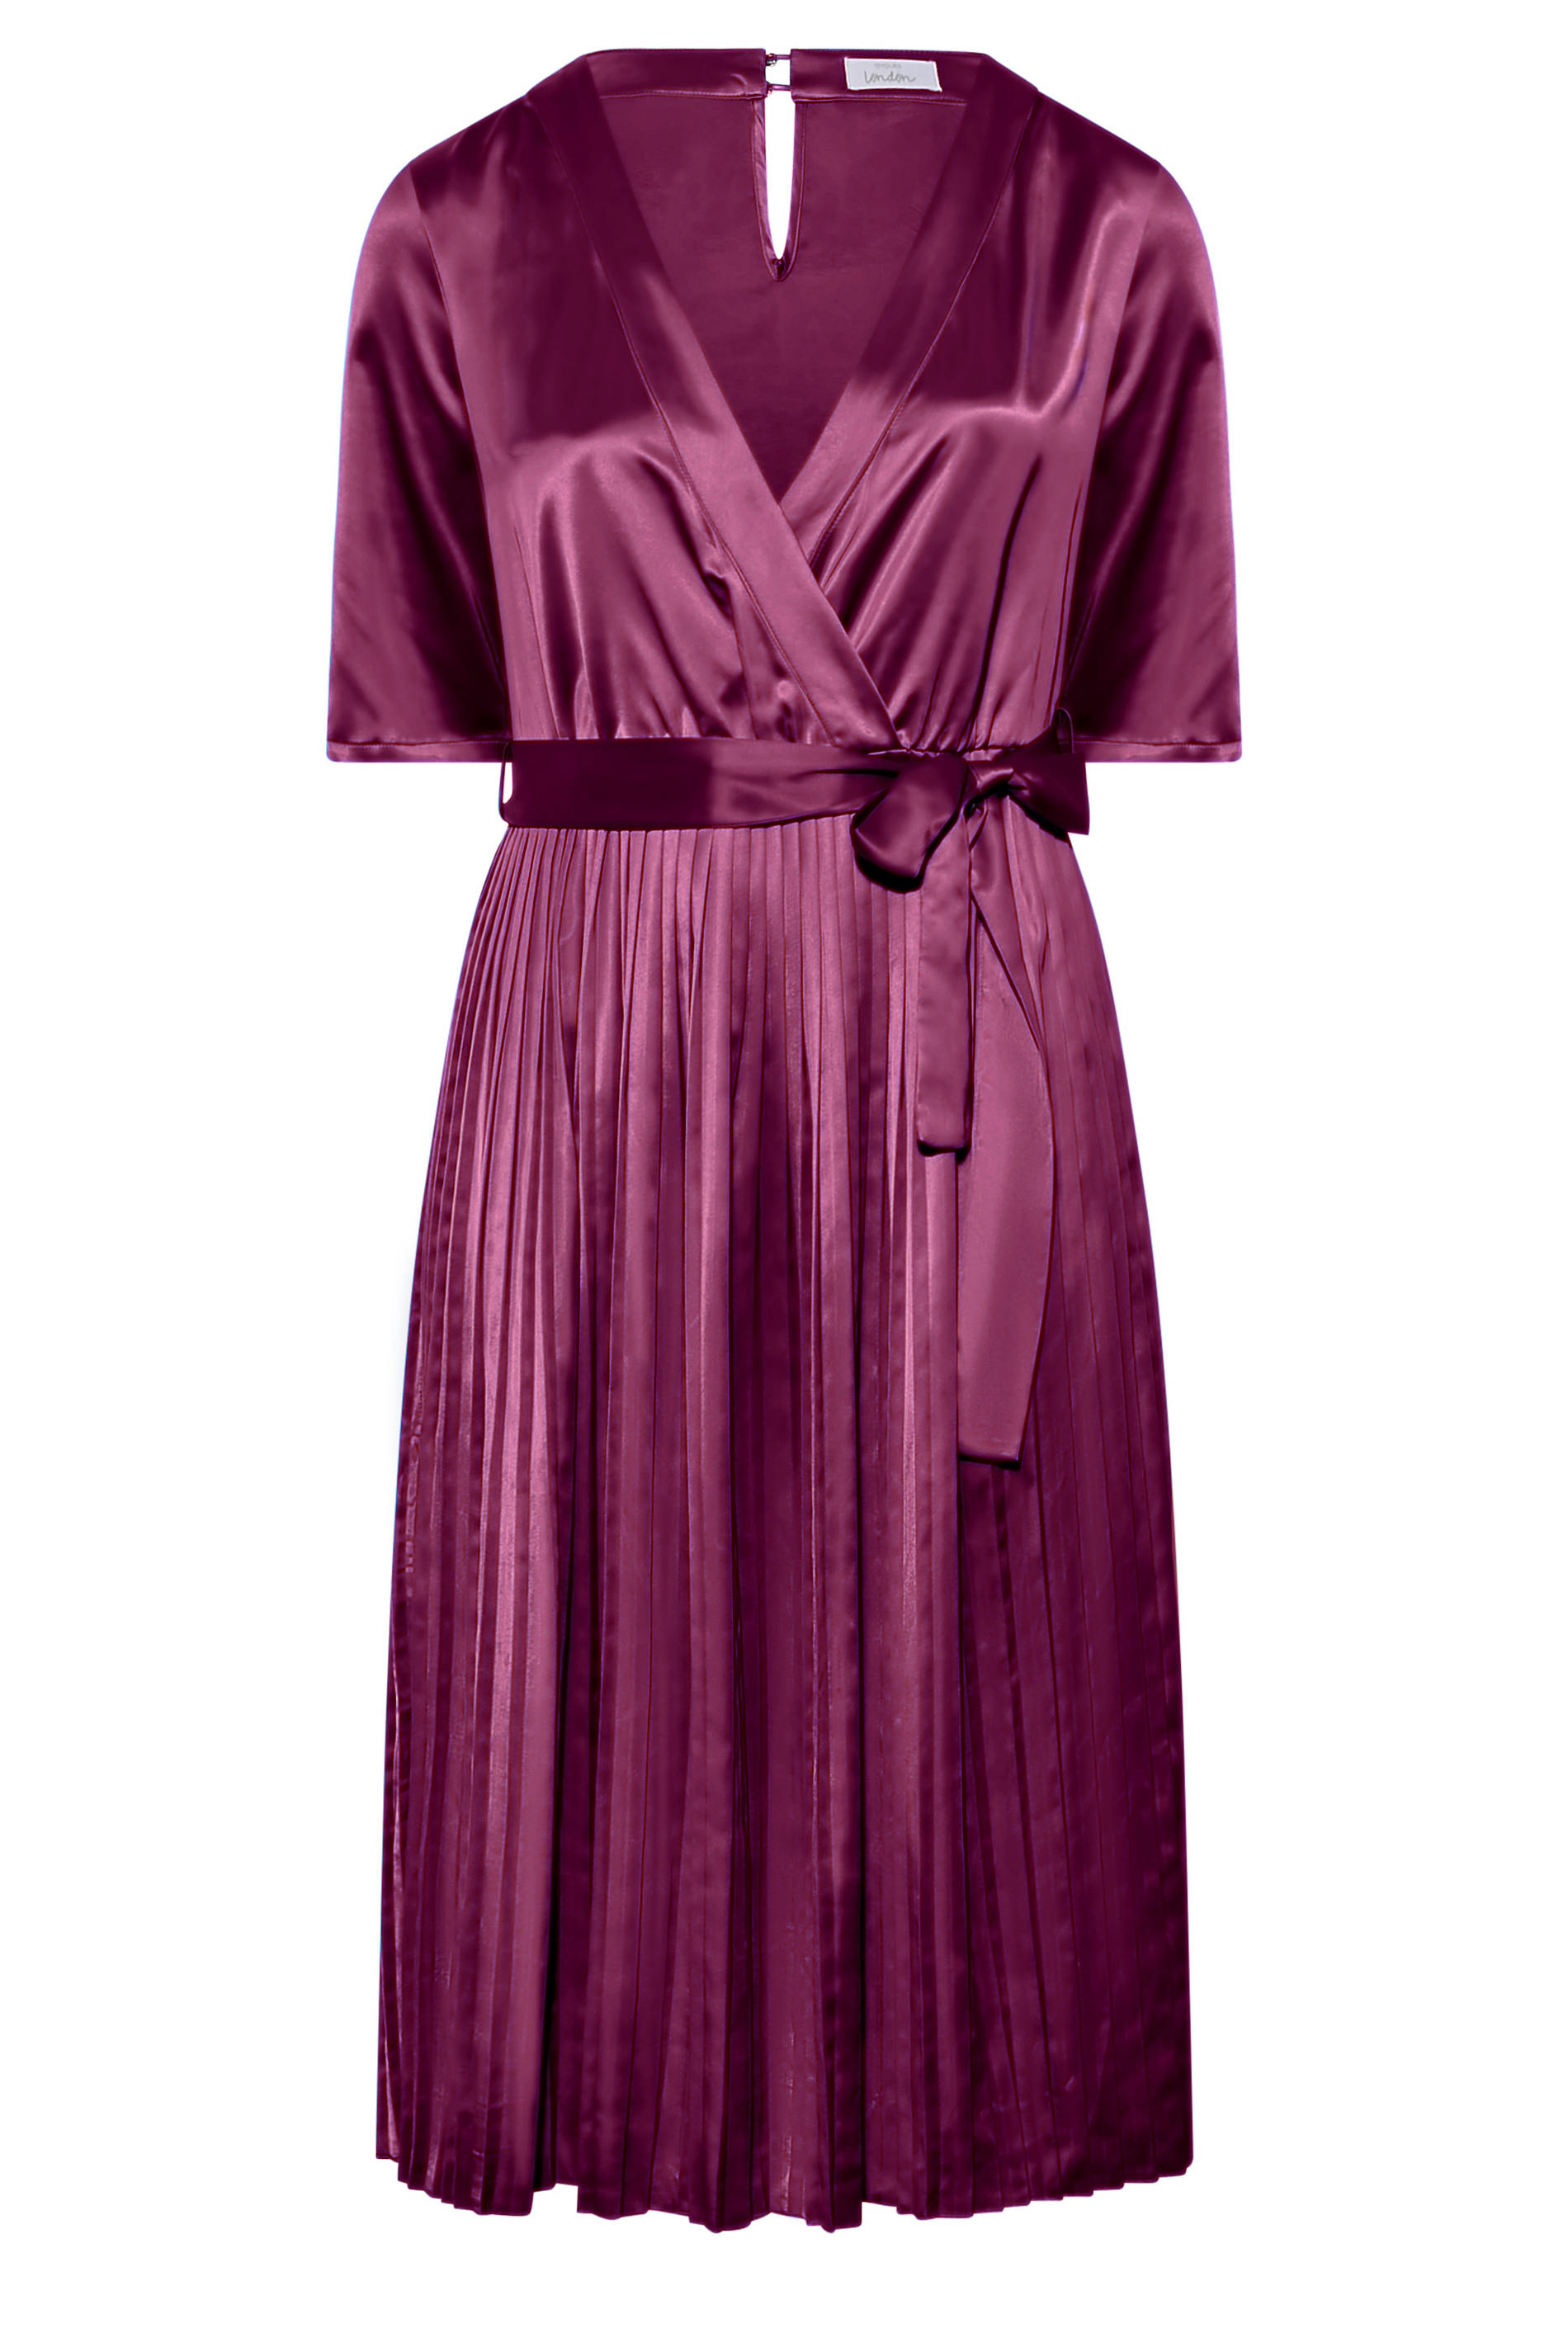 YOURS LONDON Plus Size Purple Satin Pleated Wrap Dress | Yours Clothing